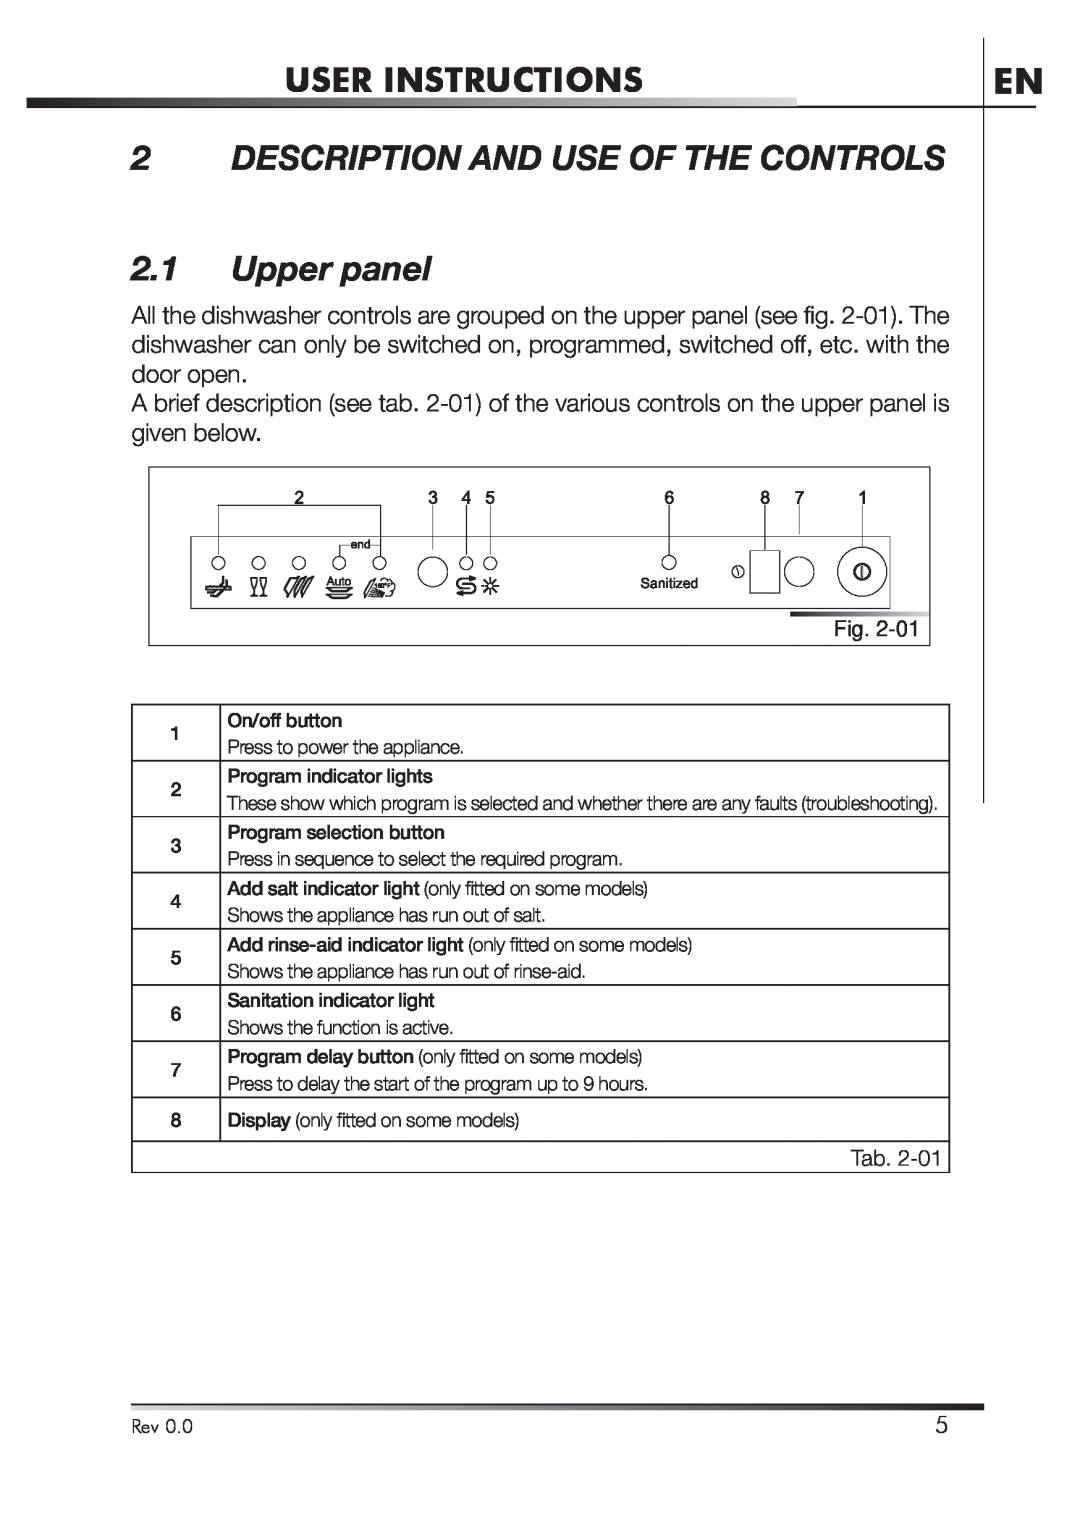 Smeg STA4645 instruction manual User Instructions, DESCRIPTION AND USE OF THE CONTROLS 2.1 Upper panel 